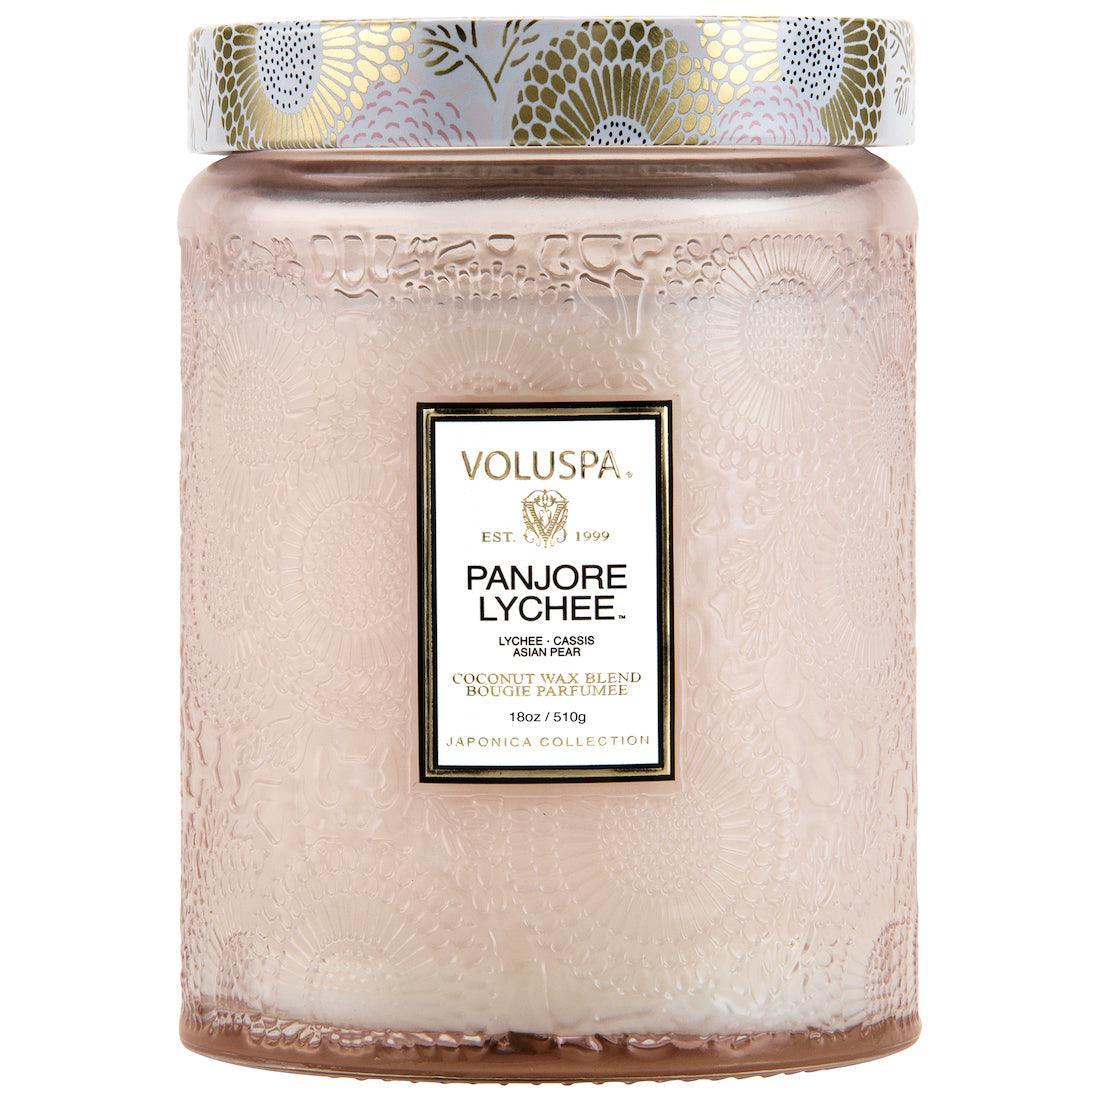 Voluspa - Duftkerze Panchore Lychee | Japonica Collection | Large Jar - Codeso Living